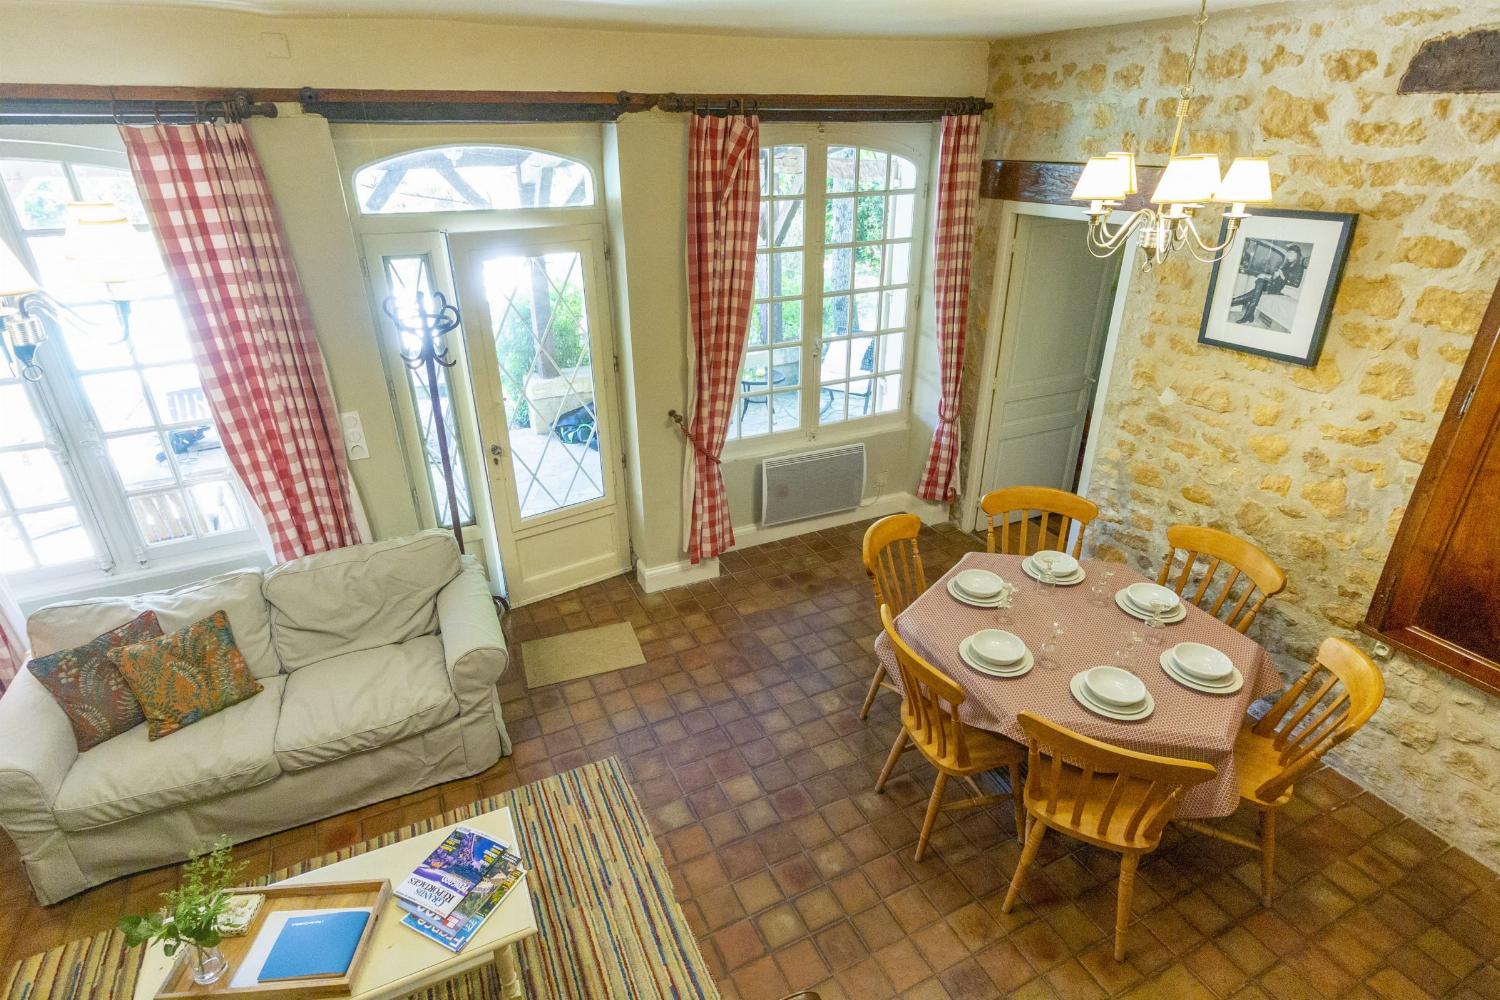 Dining room | Holiday home in Sarlat